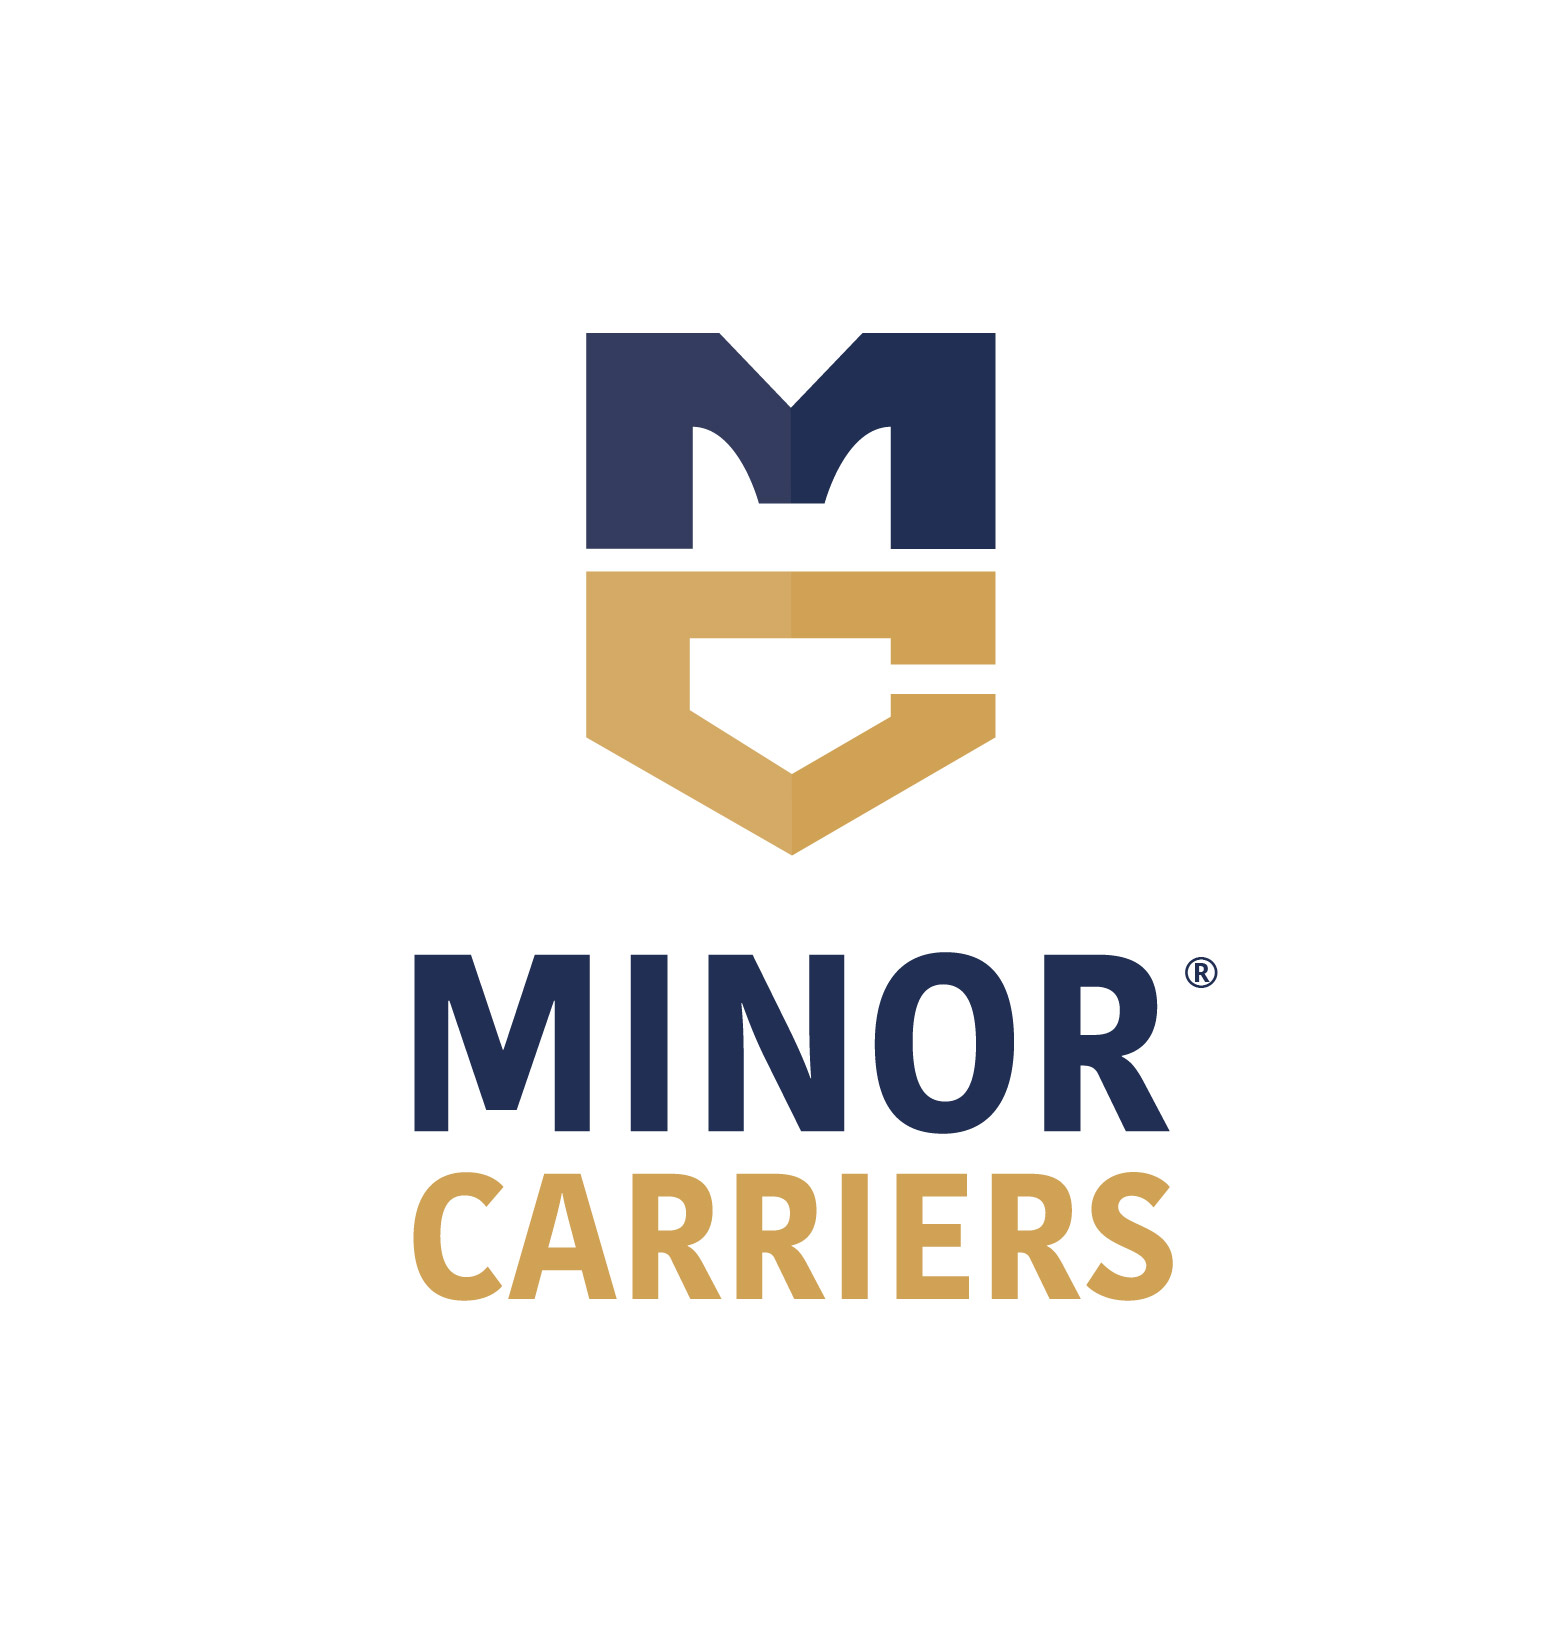 Brian Minor - CEO, Minor Carriers